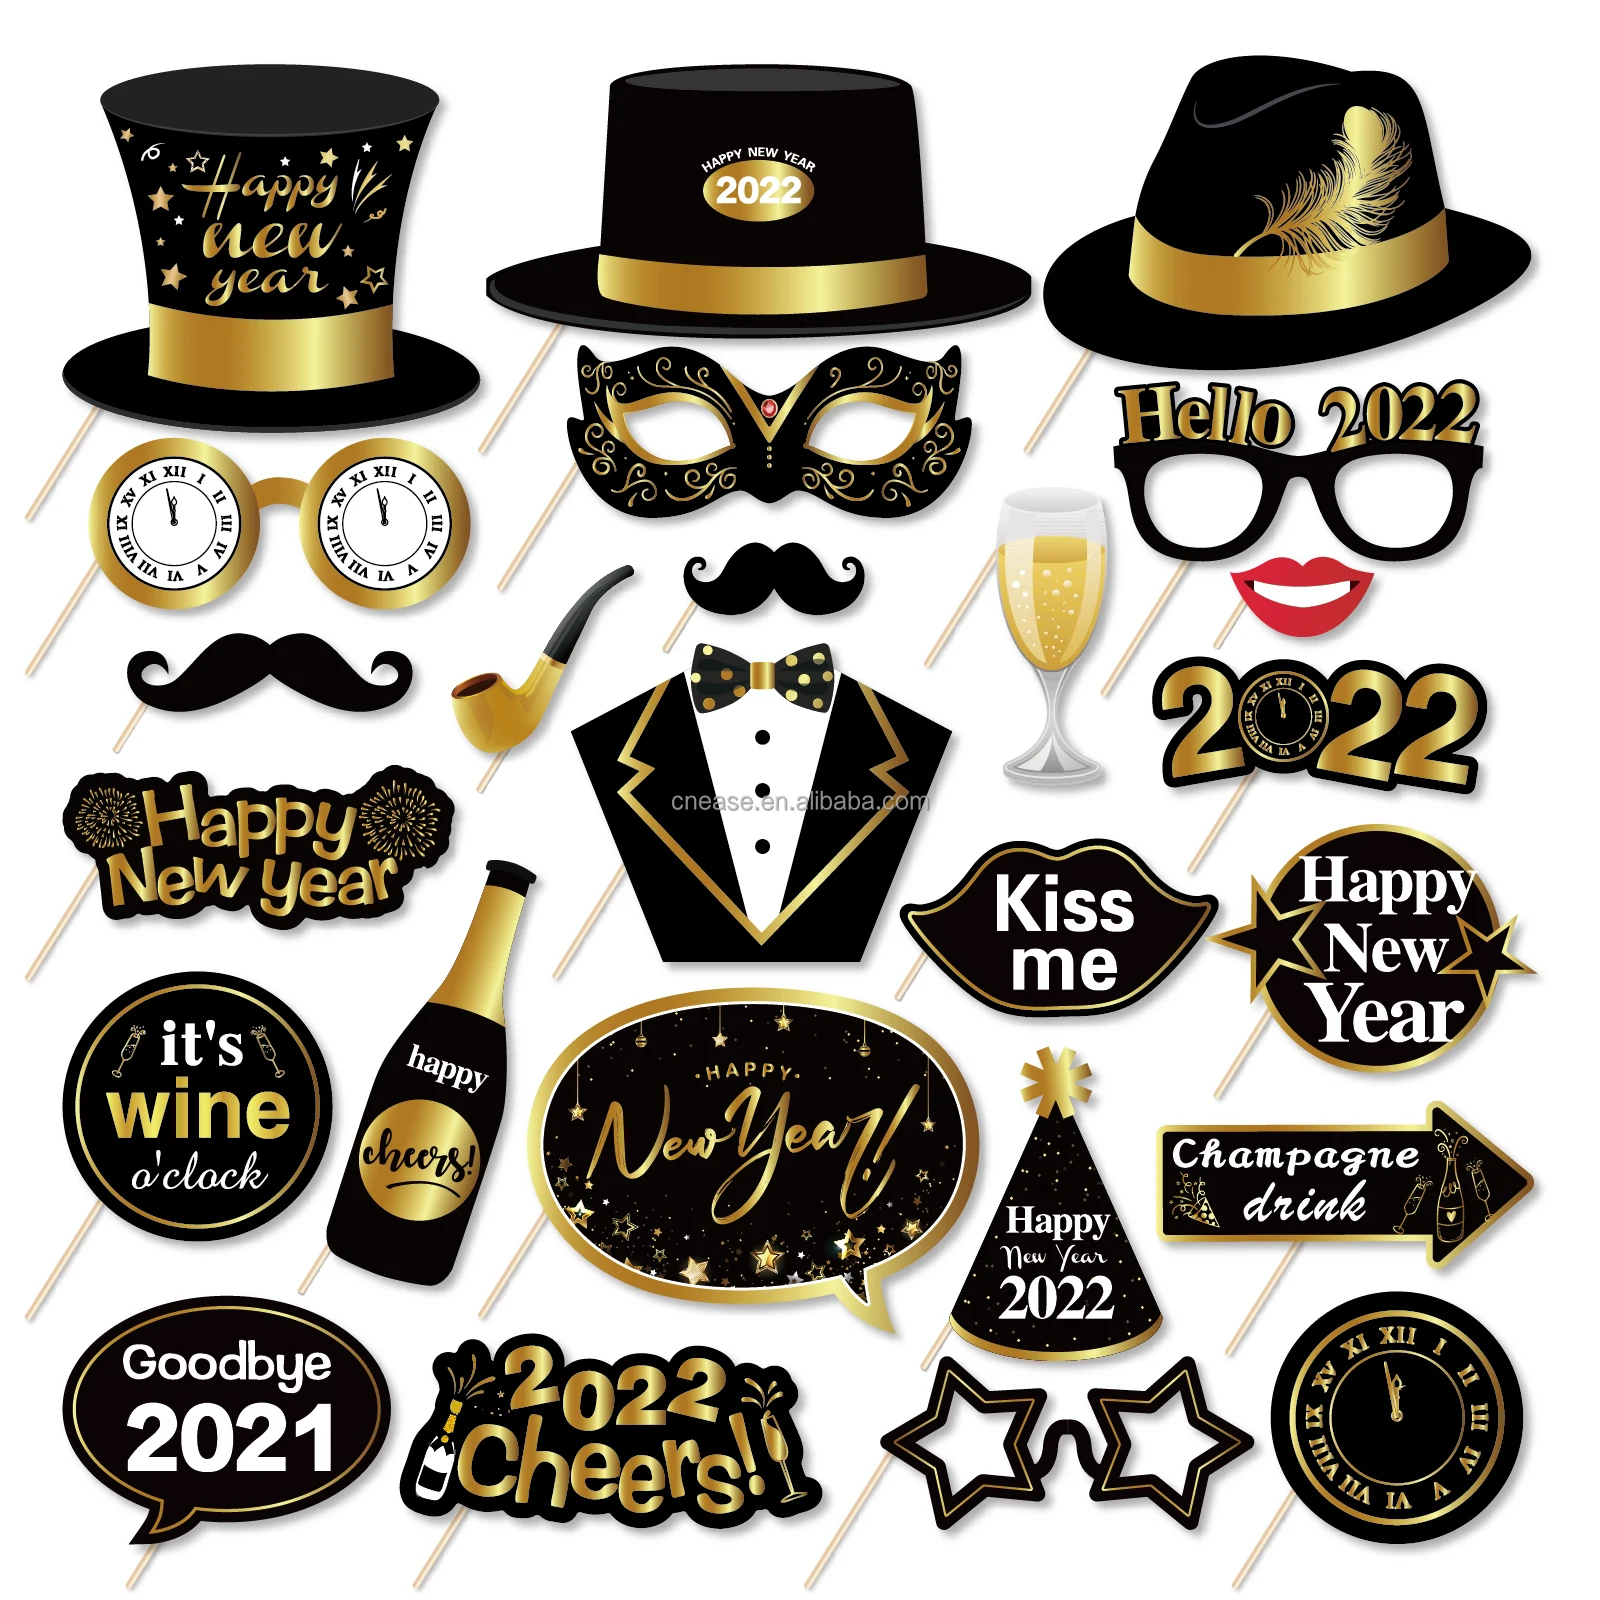 Pack of 35 New Years Eve Party Supplies 2022 New Years Eve Photo Booth Props New Years Photo Props for 2022 New Years Decorations New Years Photo Booth Props Happy New Year Decorations 2022